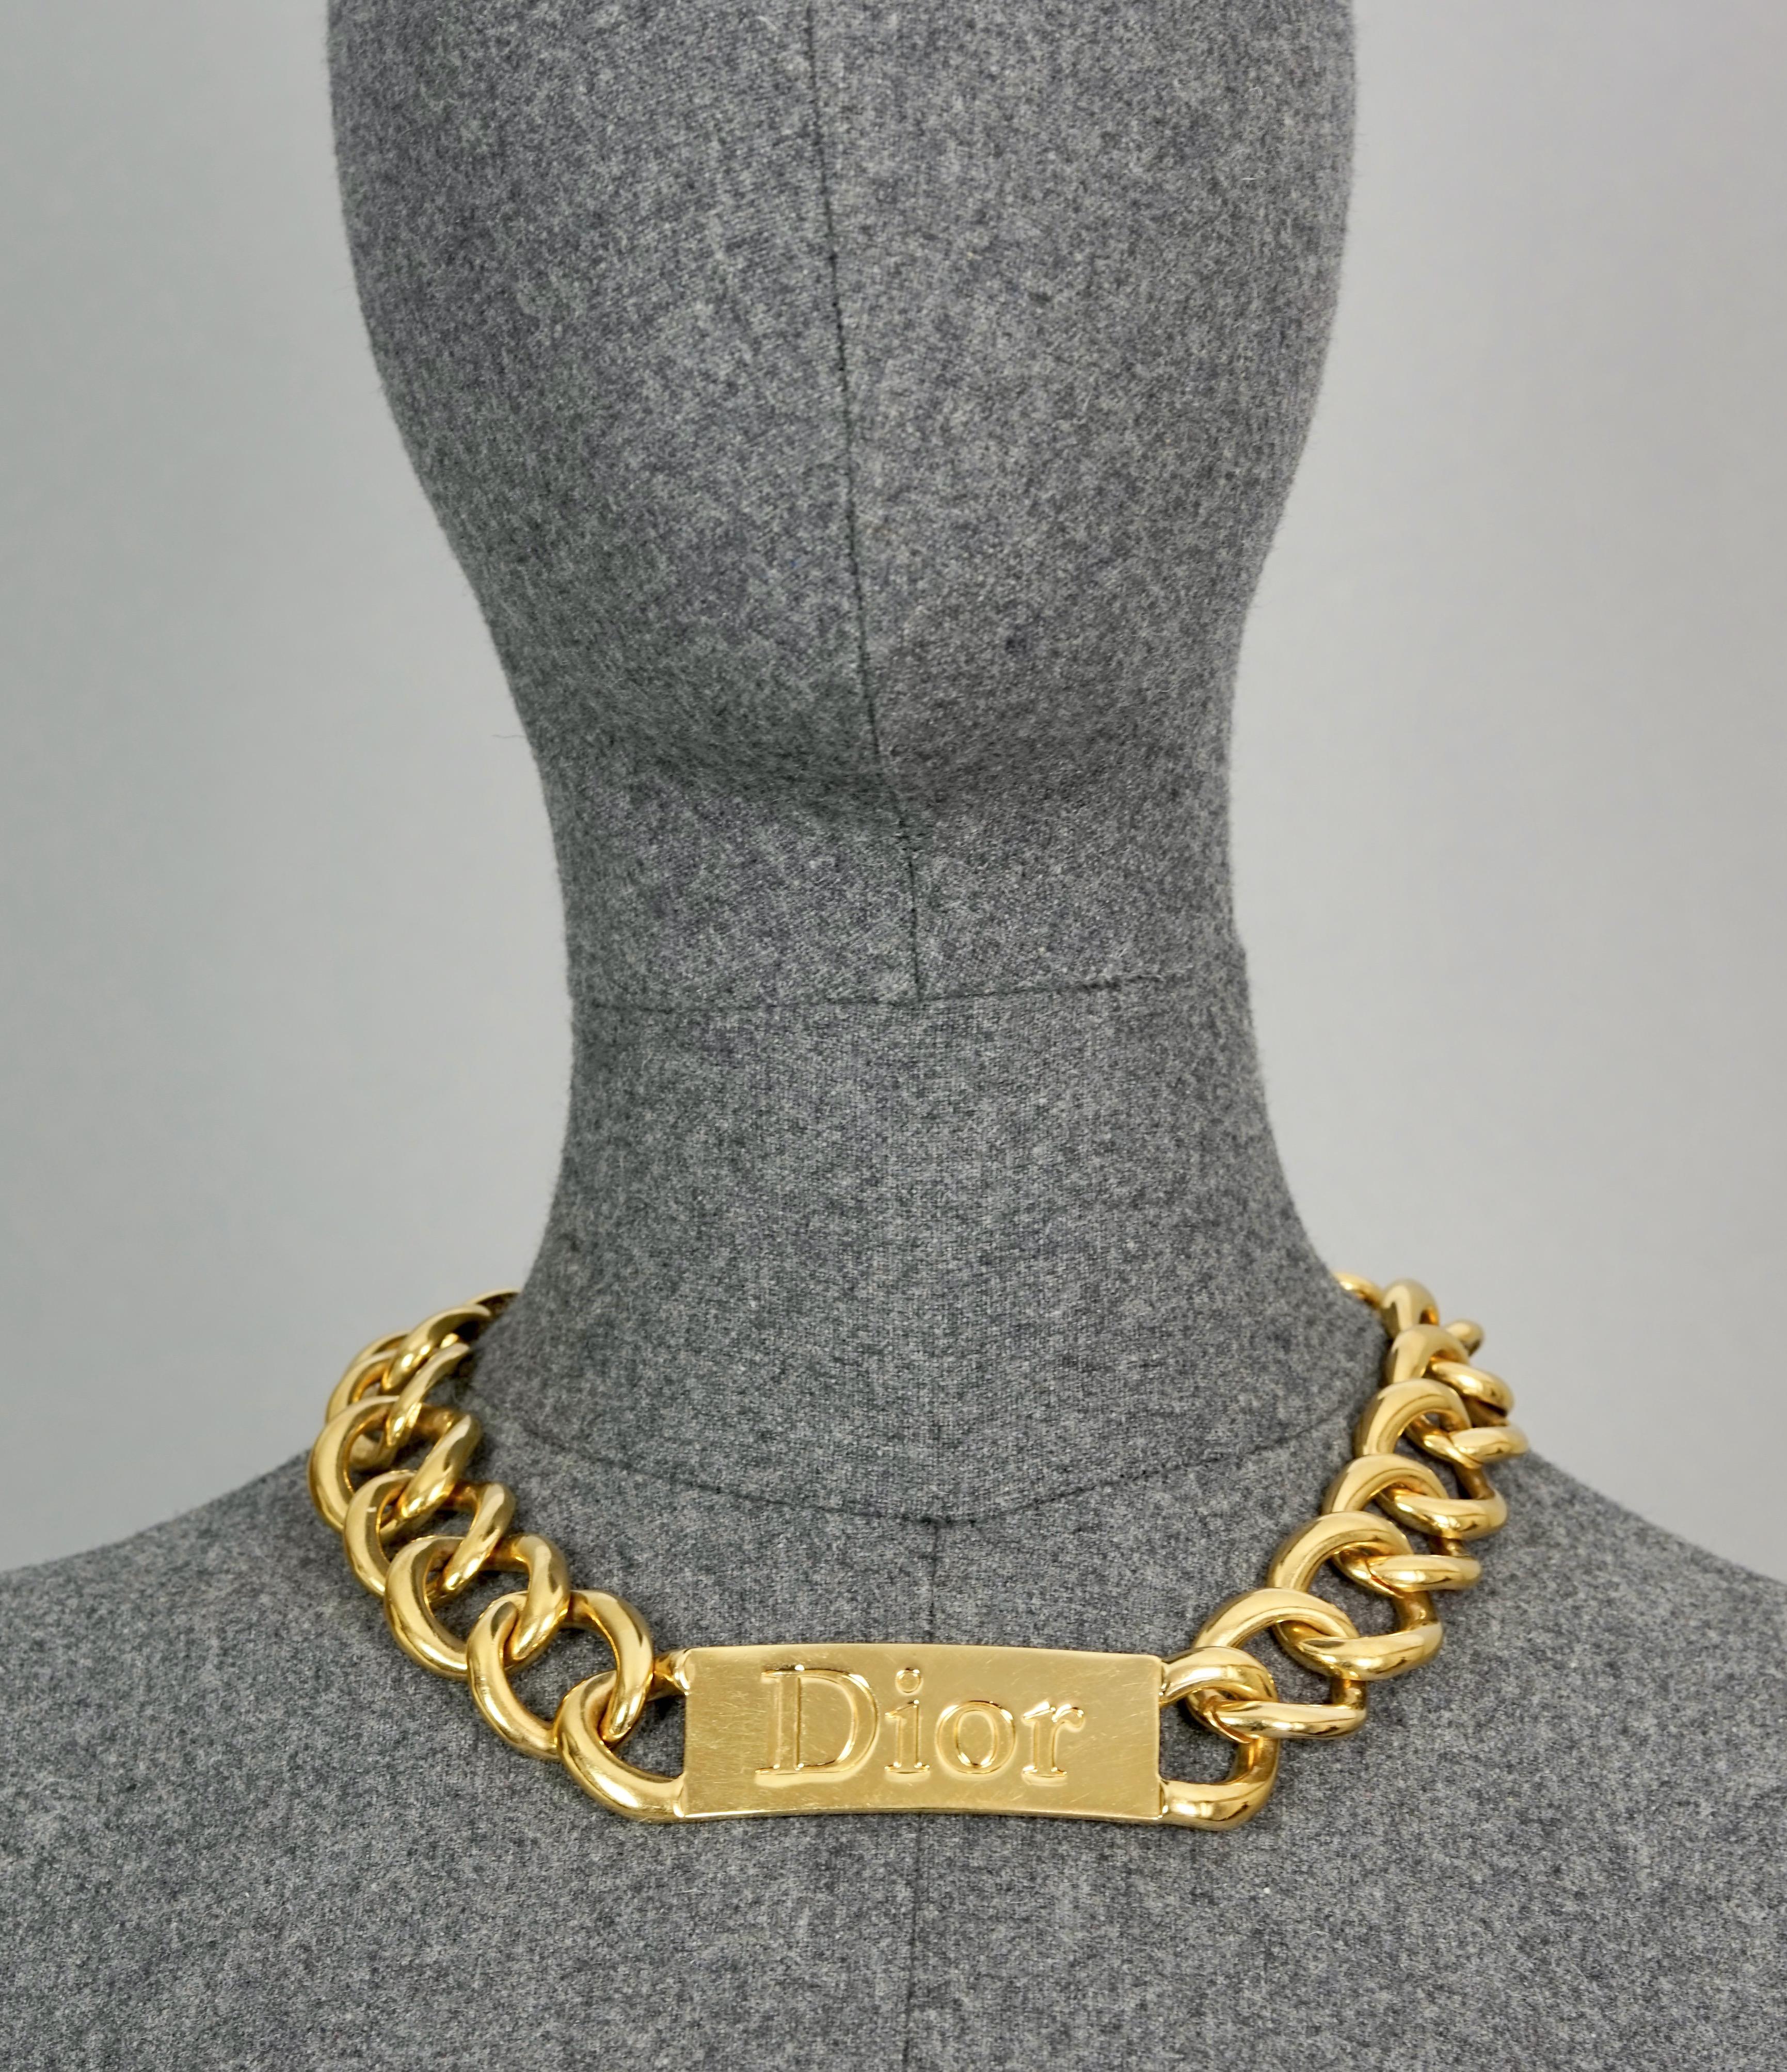 Vintage Massive CHRISTIAN DIOR by John Galliano Name Plate Chain Necklace

Measurements:
Height: 0.94 inch (2.4 cm)
WearableLength: 16.73 inches (42.5 cm) to 18.70 inches (47.5 cm) 

Features:
- 100% Authentic CHRISTIAN DIOR.
- Massive/ chunky name